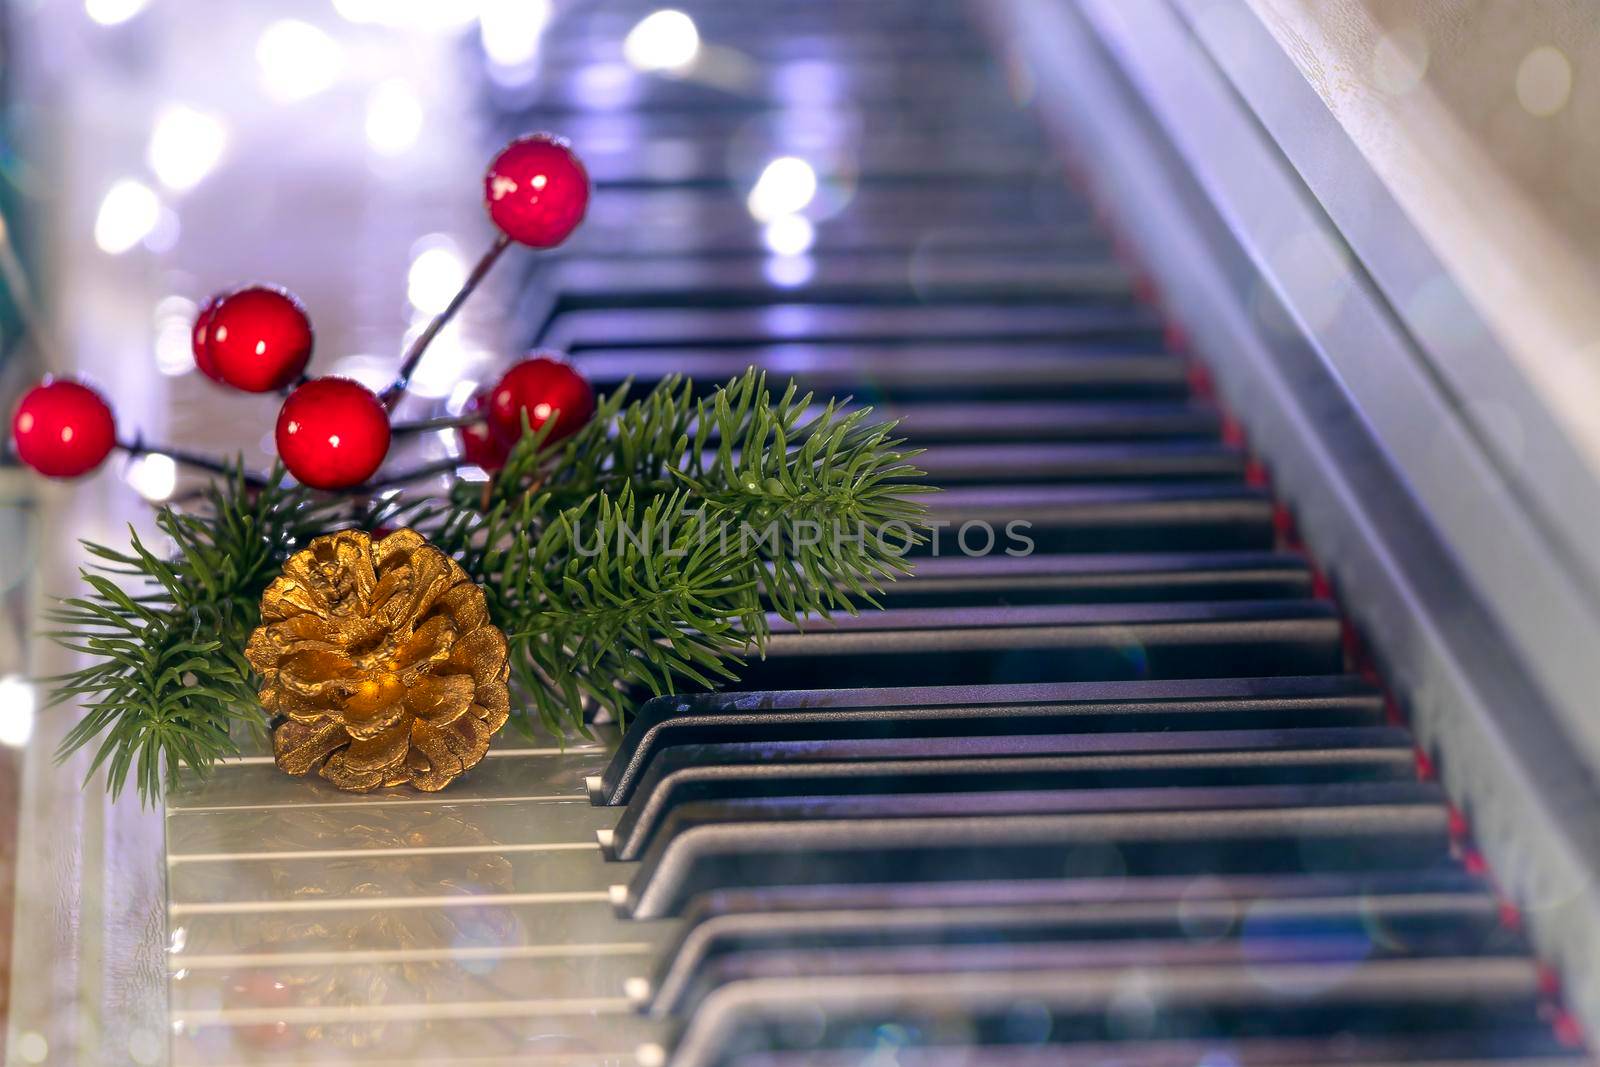 piano keys with golden cone, christmas tree branch and red berries on bokeh background. New Year or Christmas music concept. by Leoschka